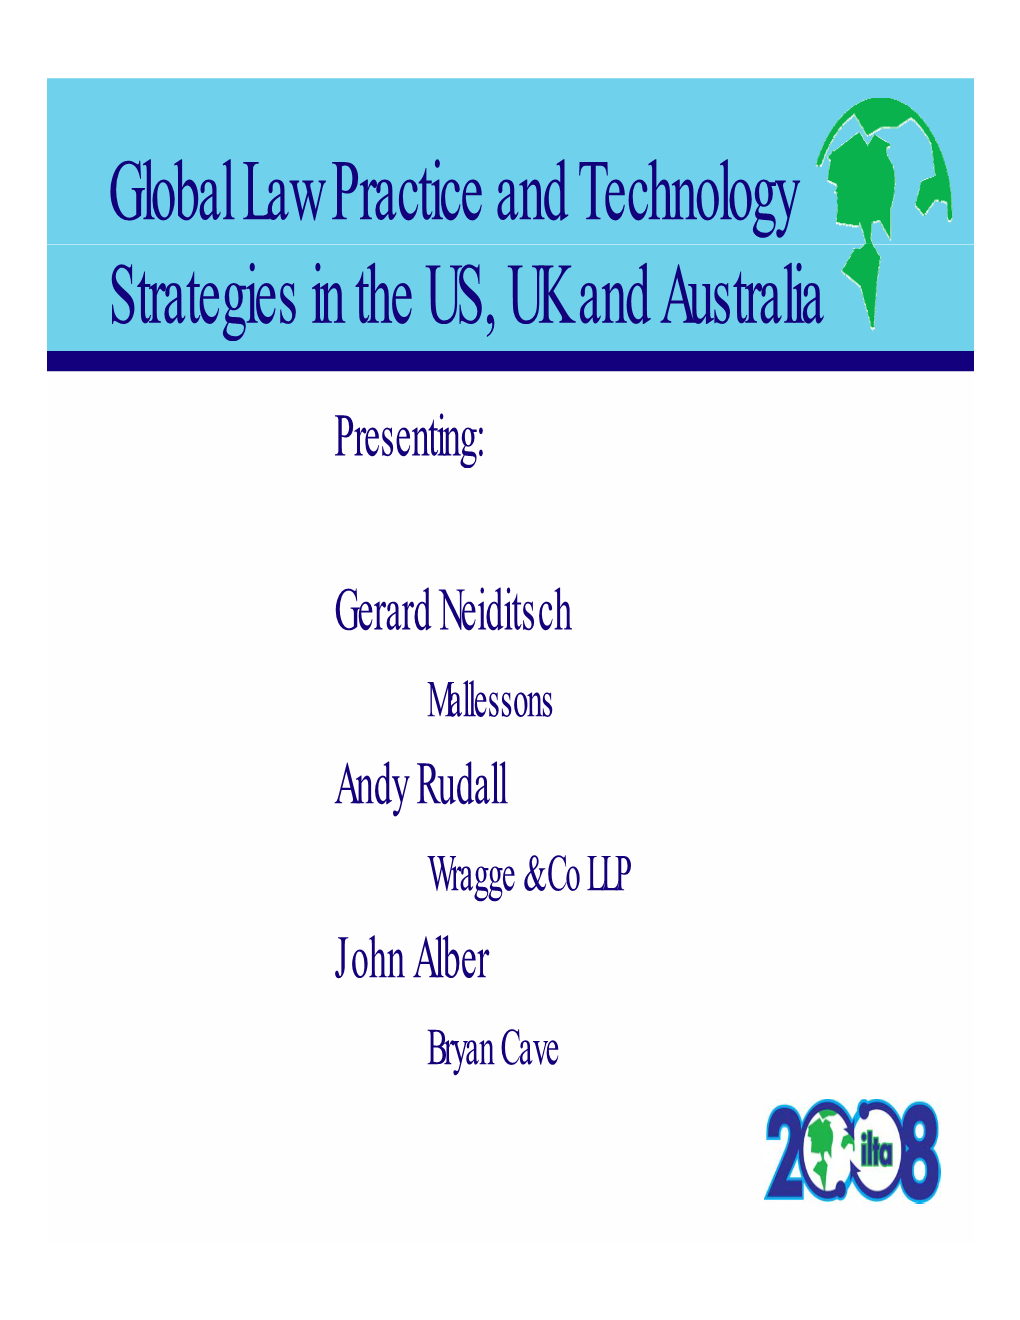 Global Law Practice and Technology Strategies in the US, UK and Australia